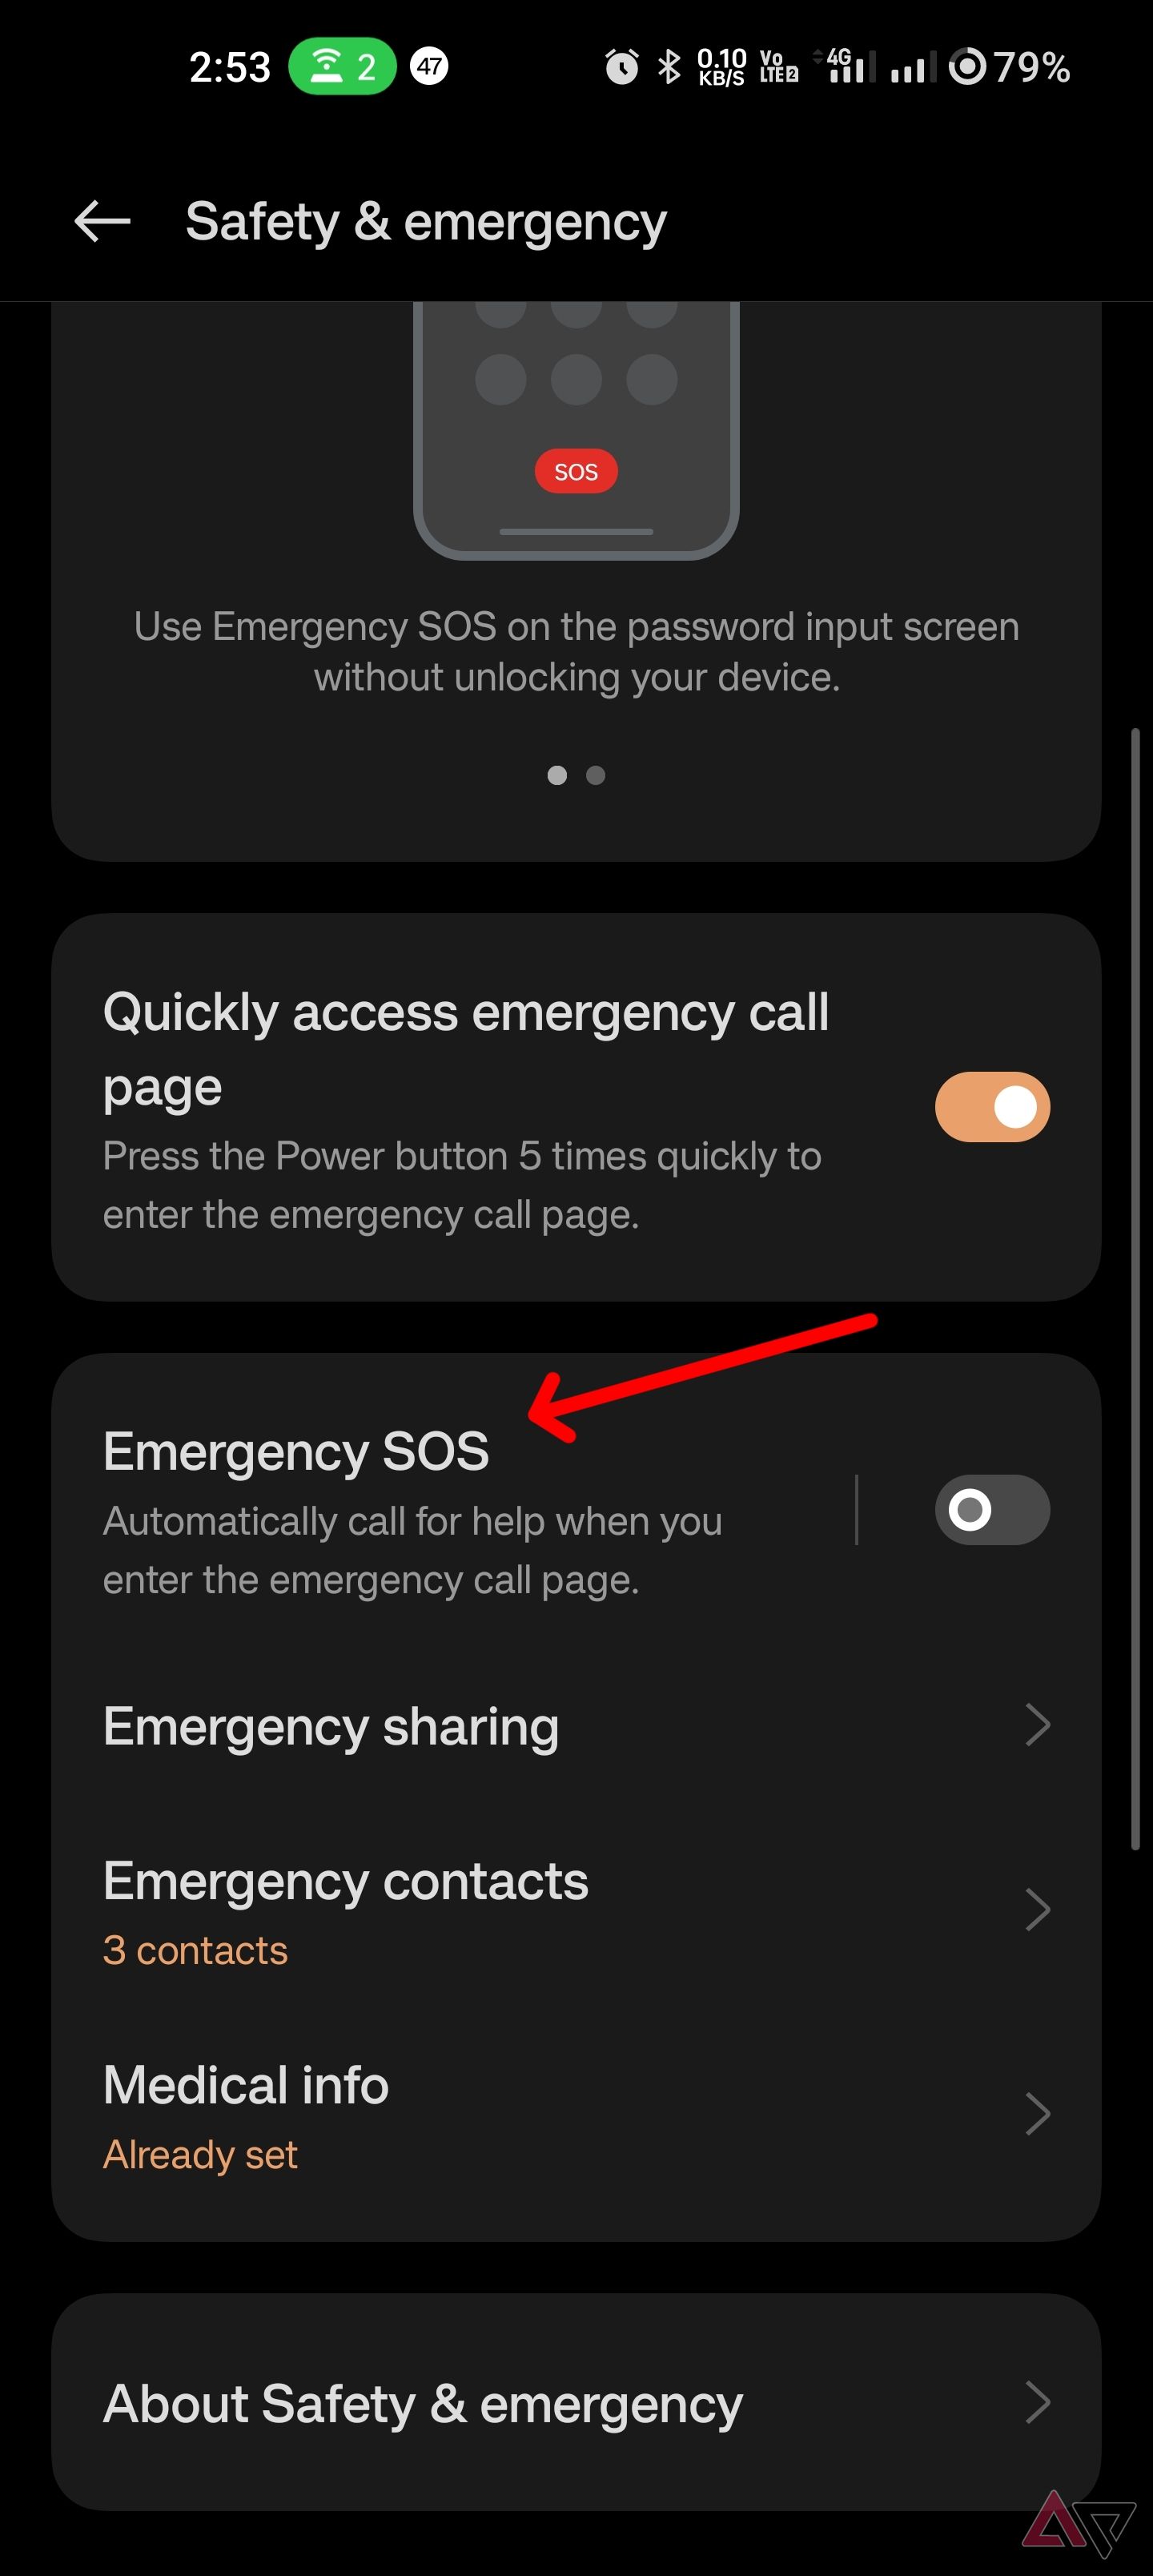 Click on emergency SOS to access its submenu.